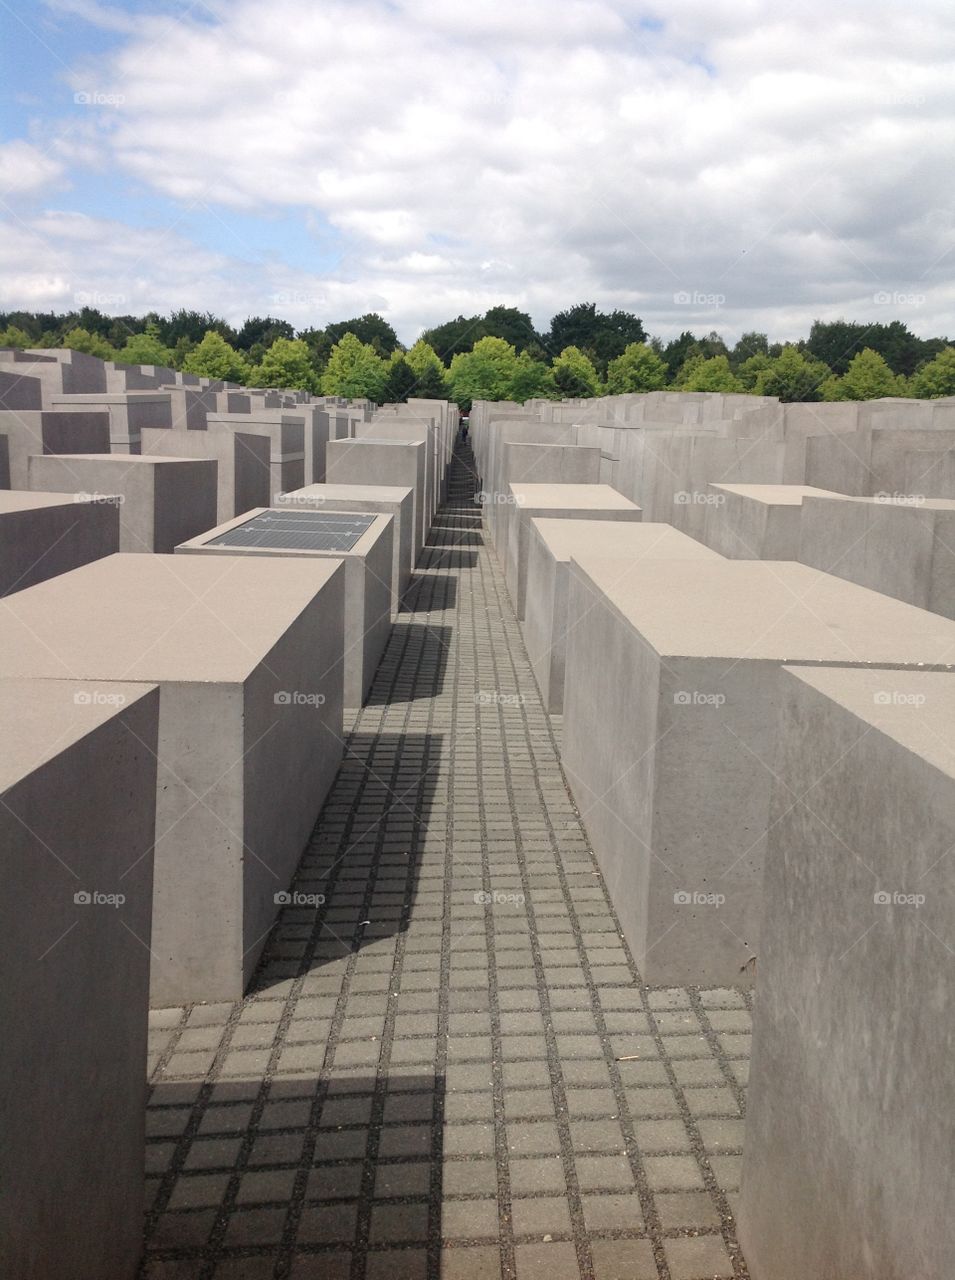 Berlin Holocaust Memorial. Controversial memorial for the victims of the German Holocaust in WWII